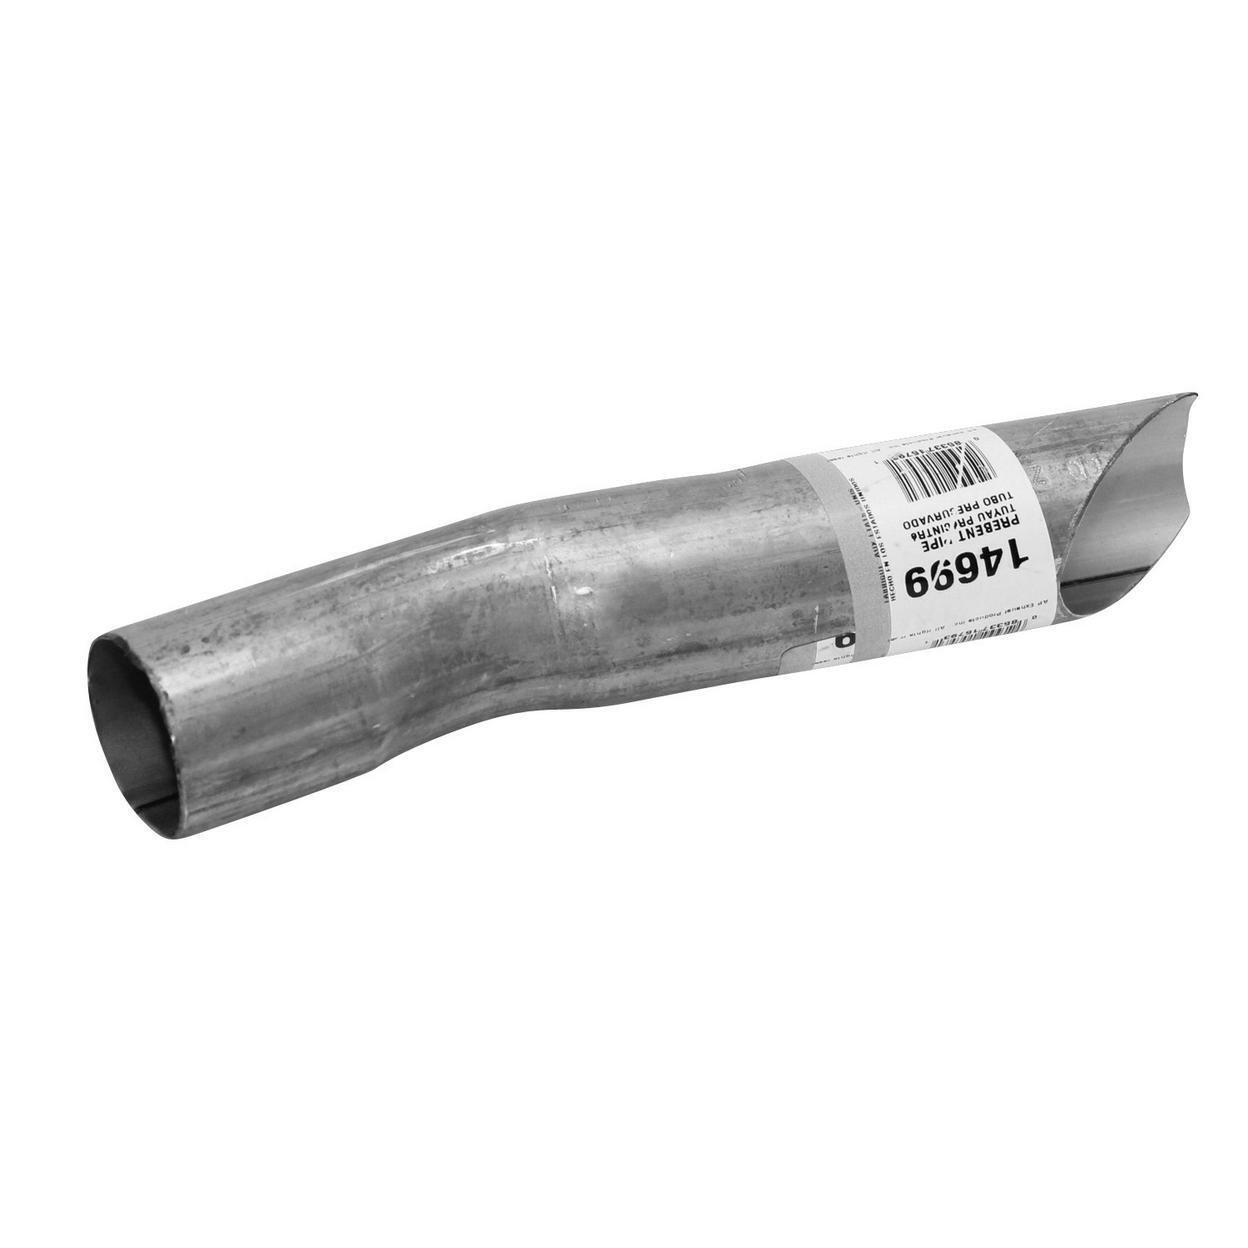 Exhaust Tail Pipe for 1993-1996 Chevrolet Beretta 2.2L L4 GAS OHV